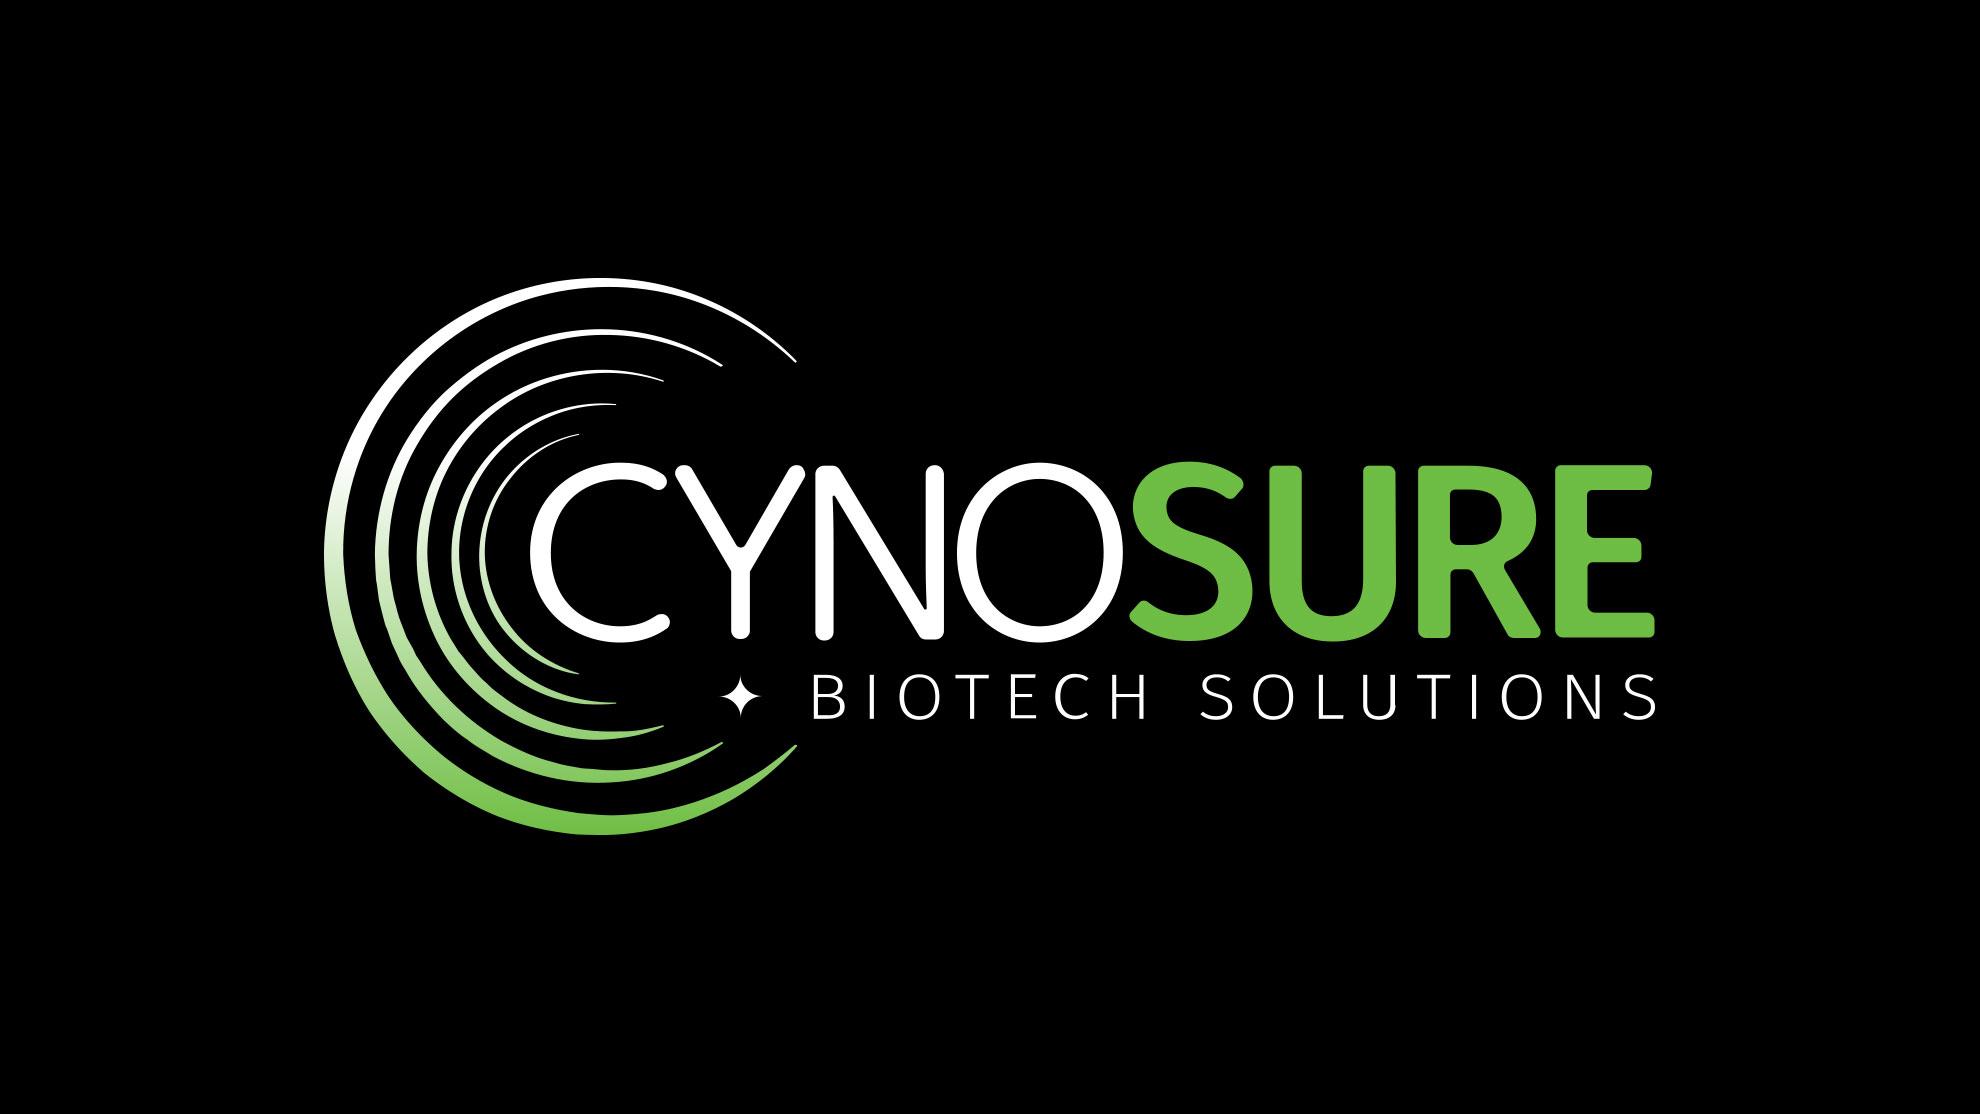 Product Biotech Products for Businesses | CYNOSURE Biotech Solutions image